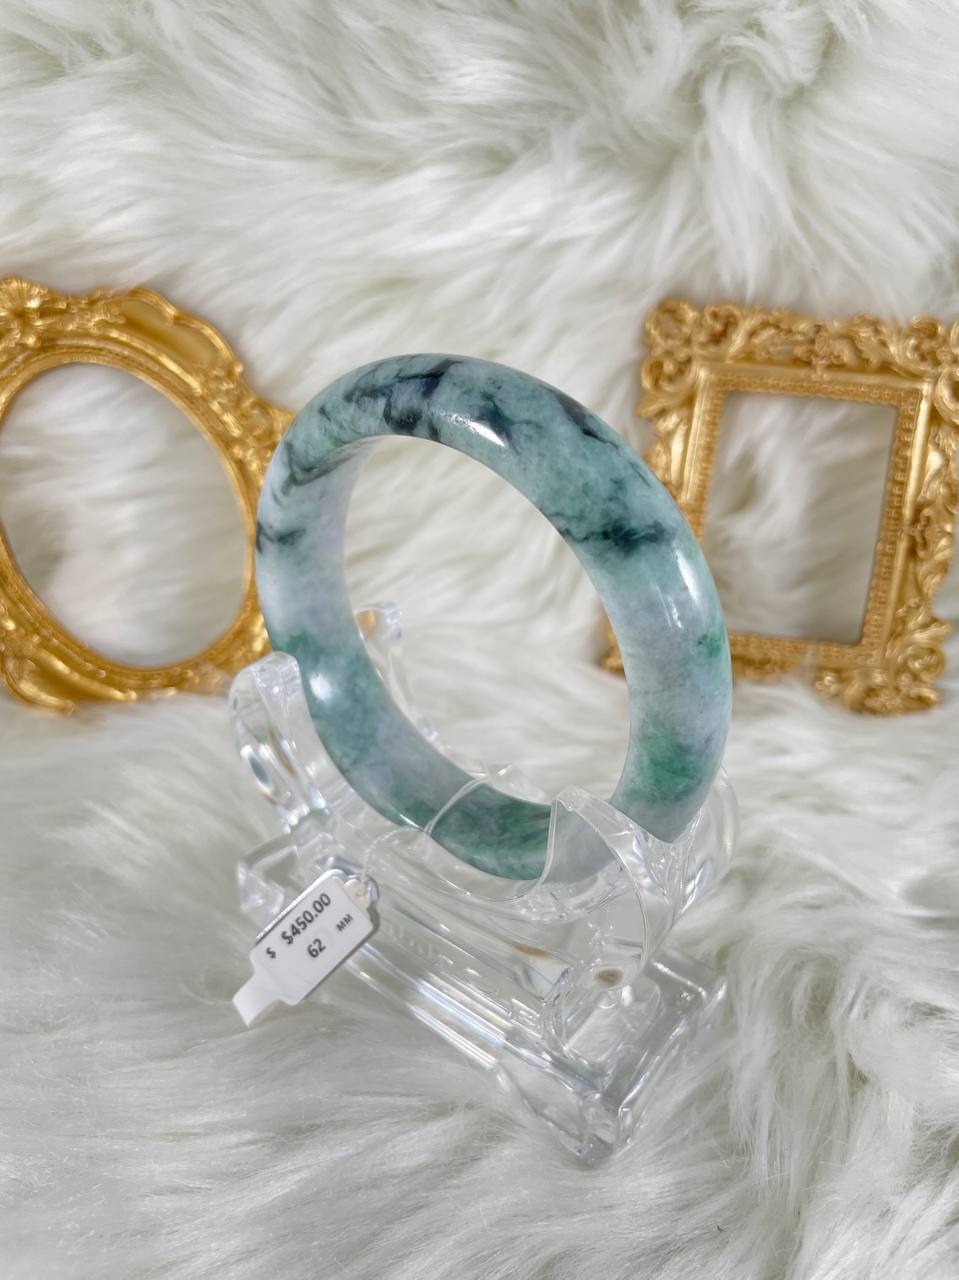 Grade A Natural Jade Bangle with certificate #36566